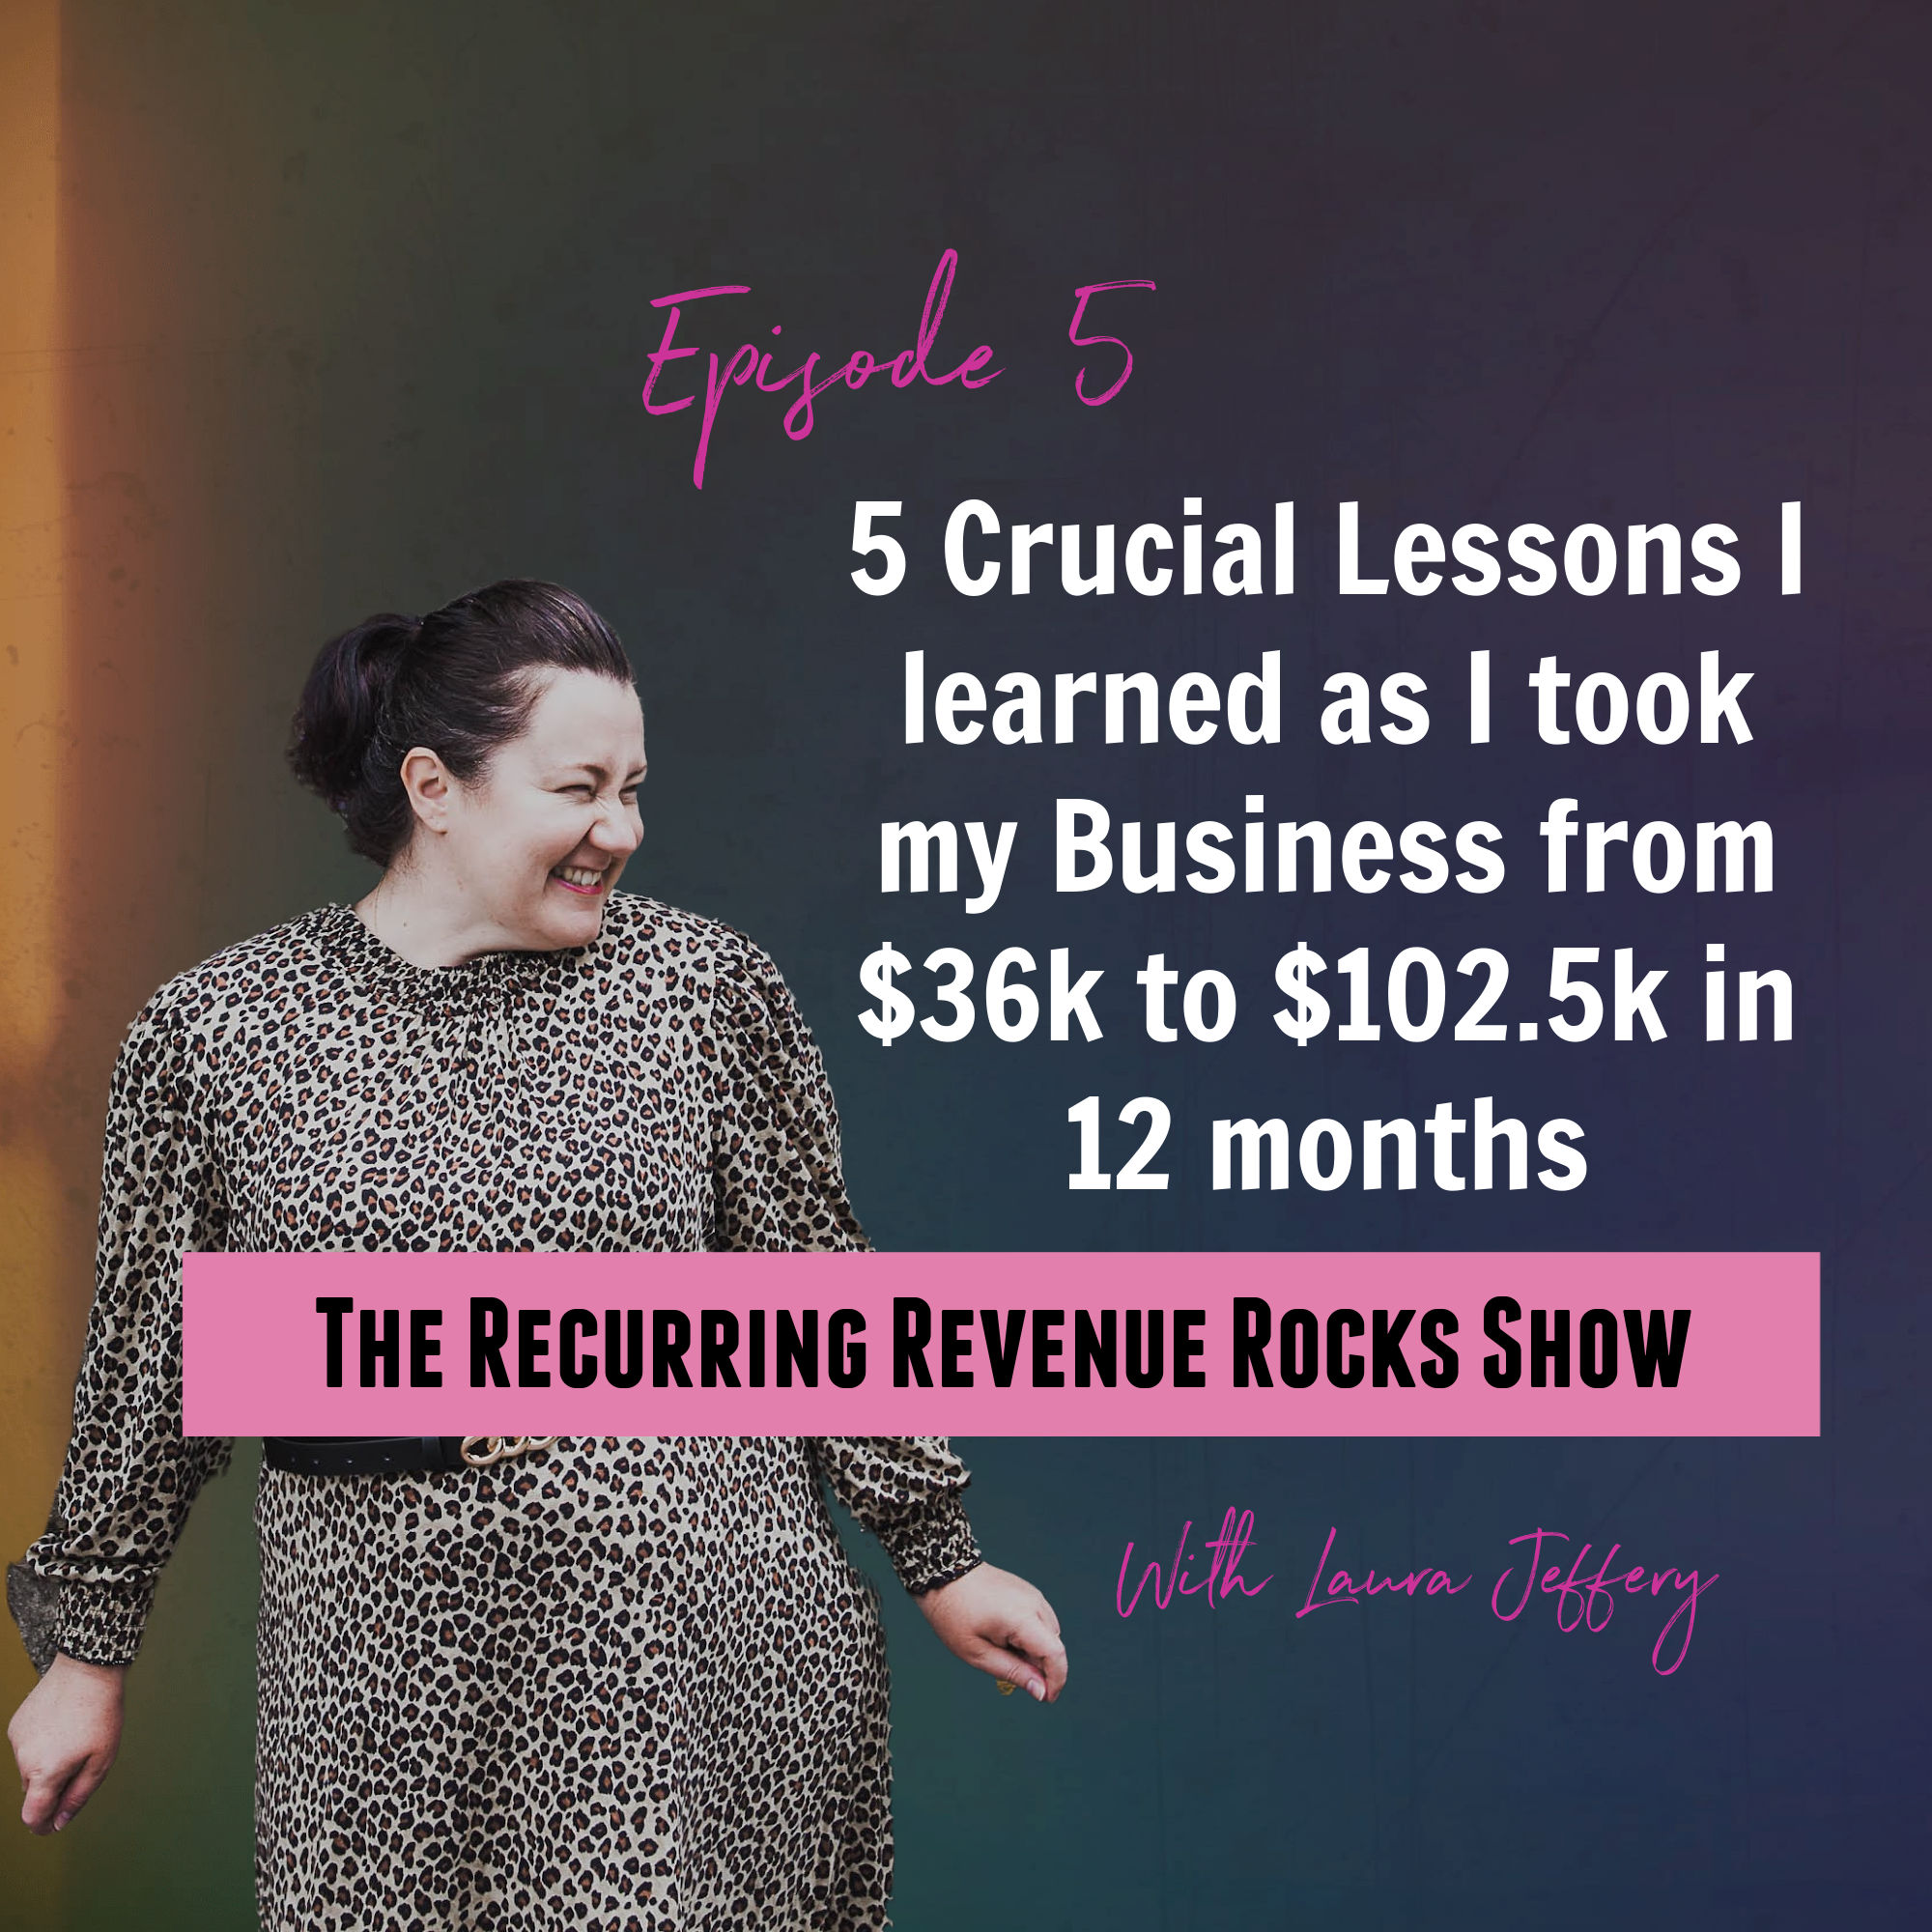 5 Lessons I learned taking my Business from $36k to $102.5k in 12 months